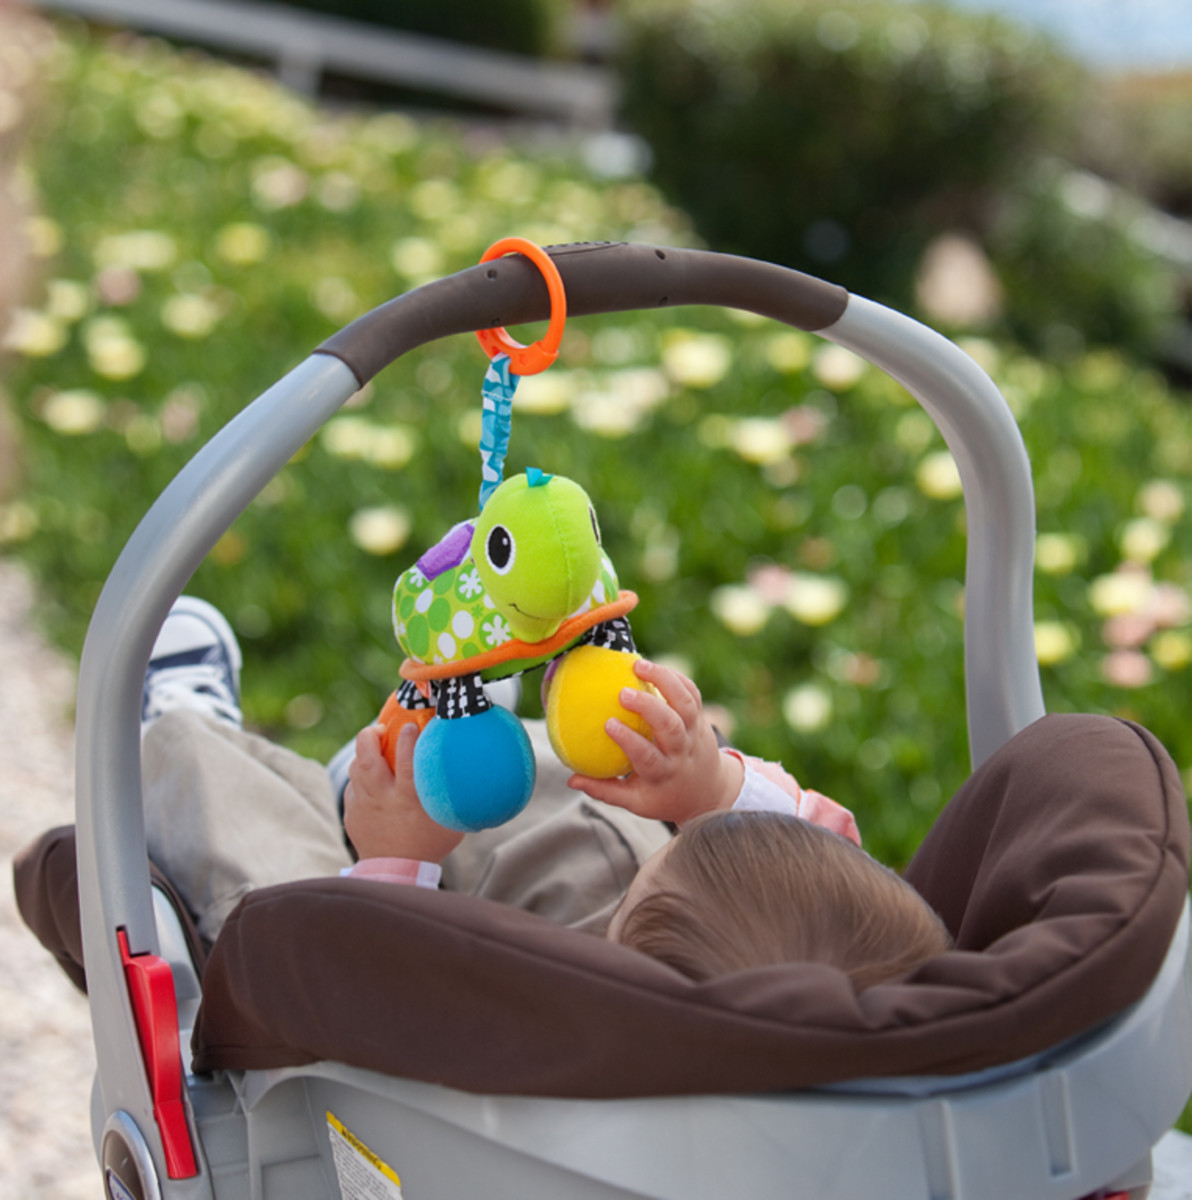 Take Topsy to the park or anywhere by attaching it to a stroller or car seat for hours of fun.